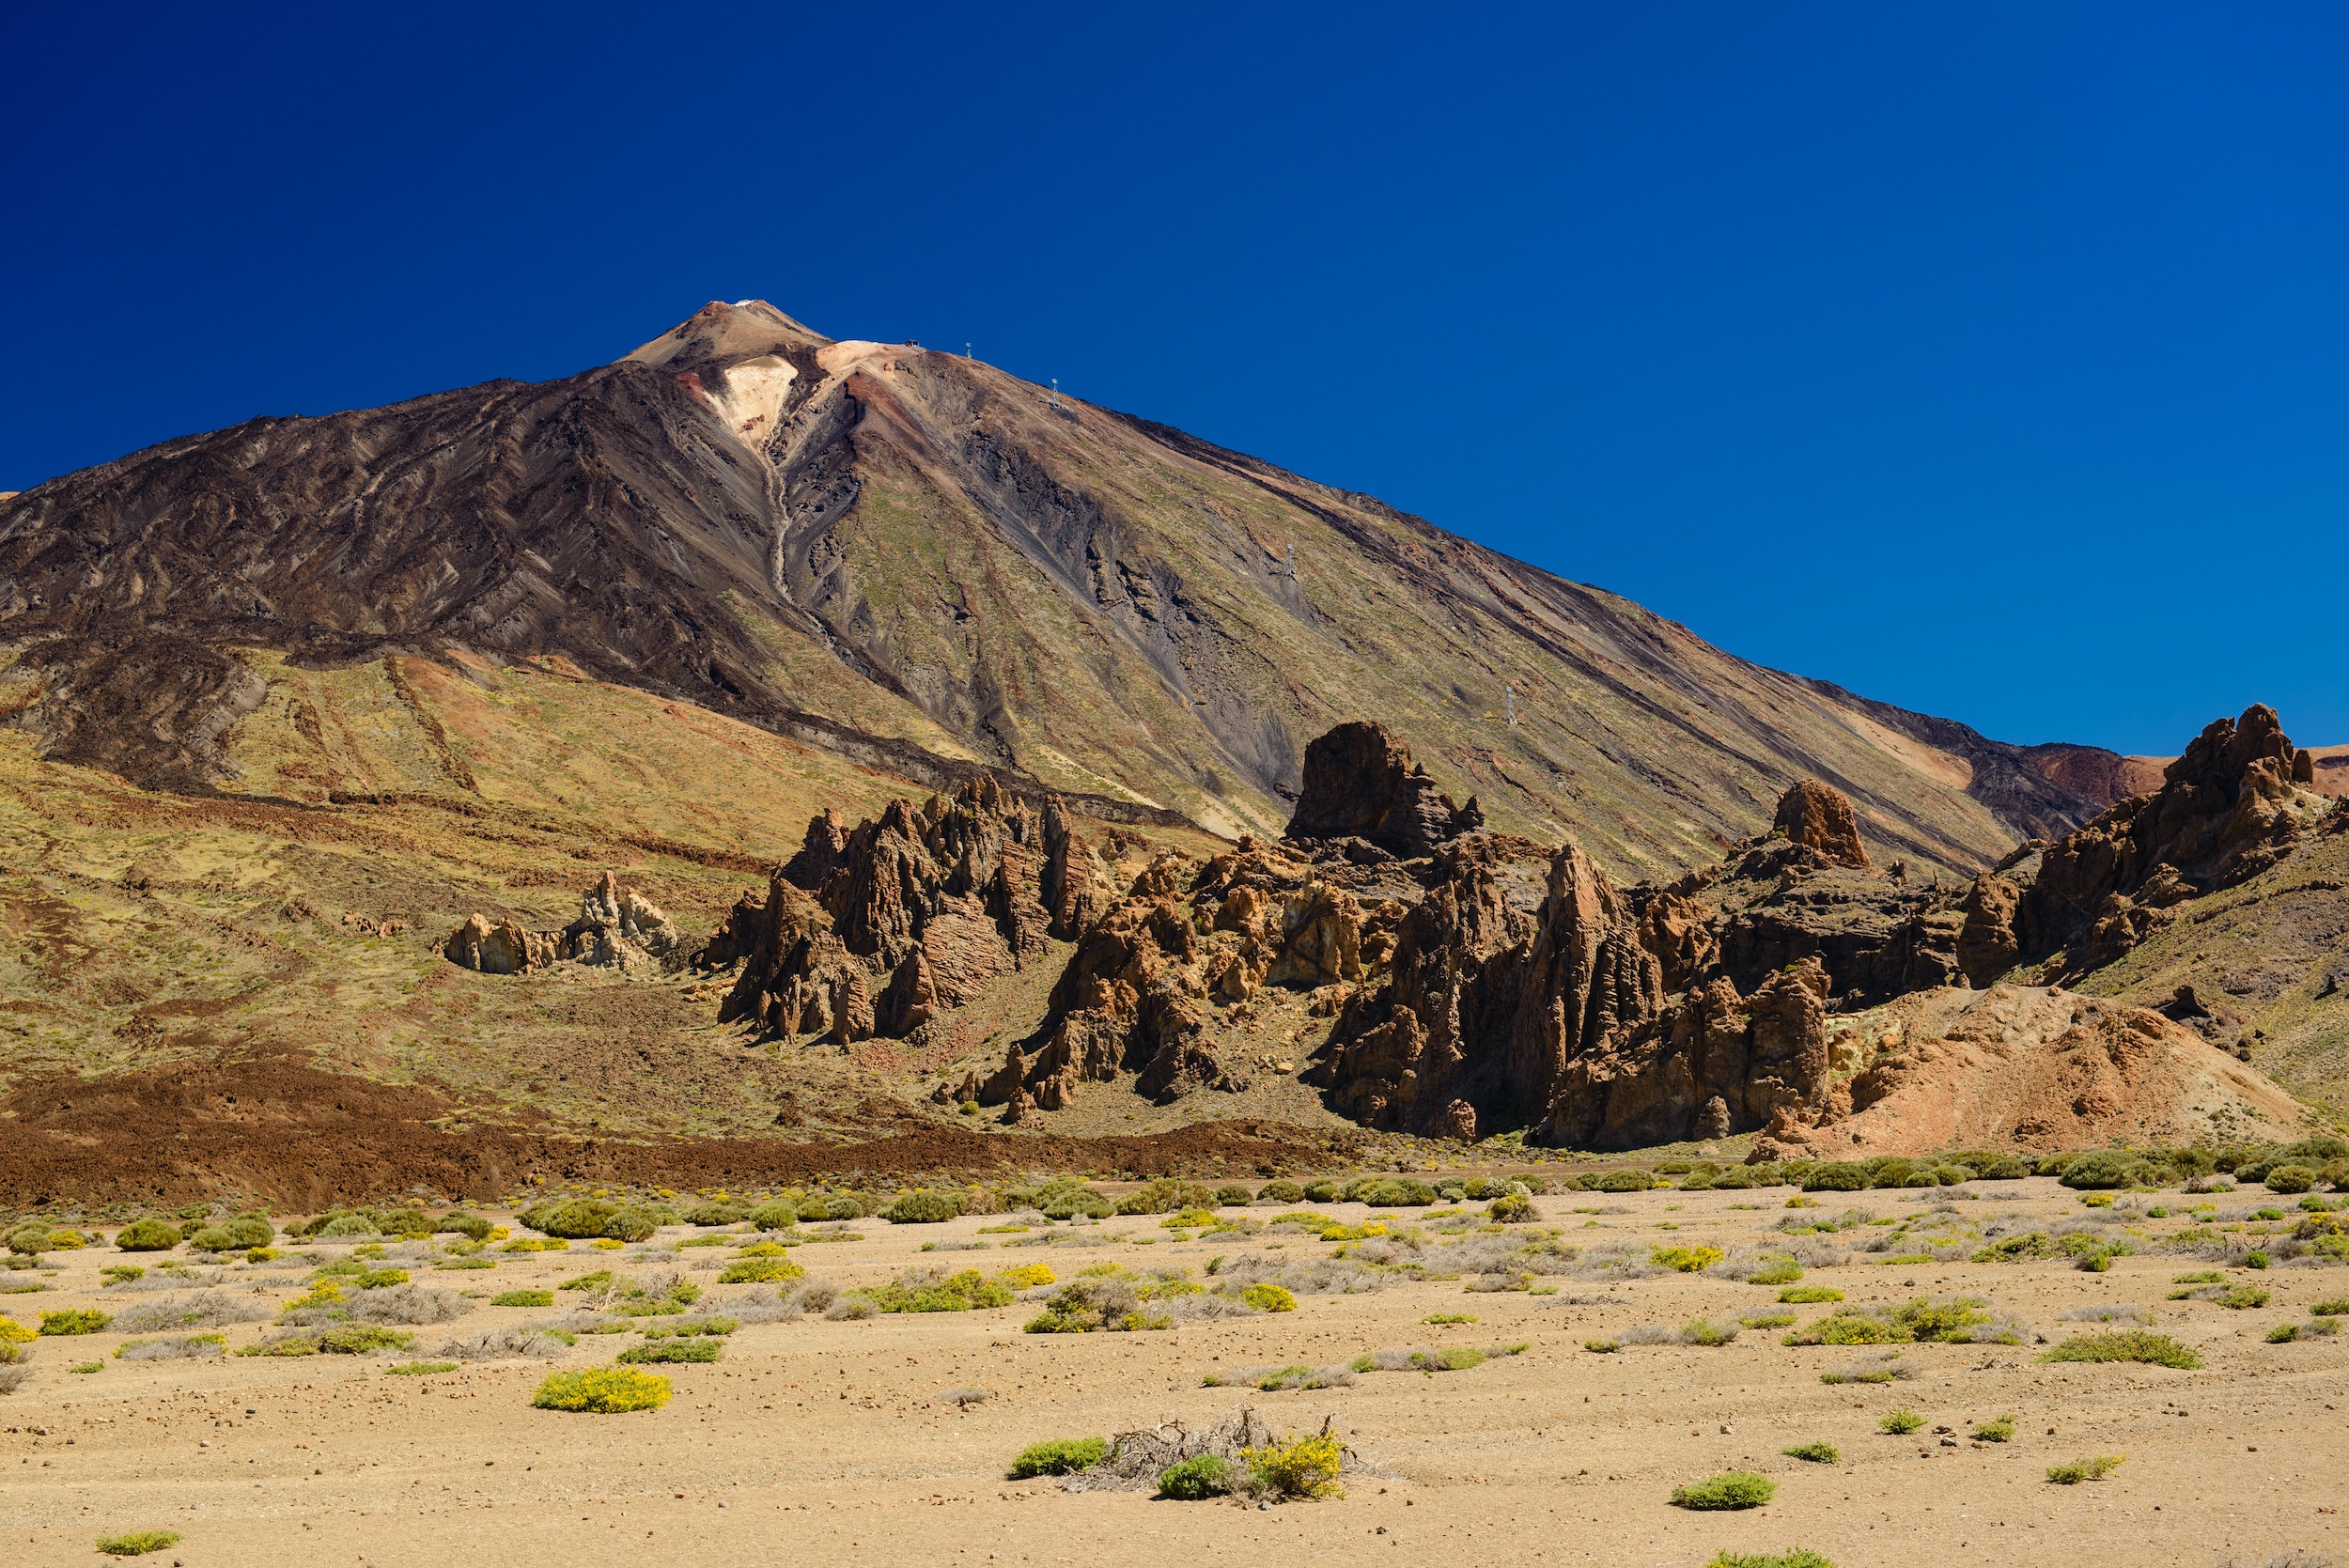 A superb destination for winter sun, dramatic landscapes and exciting day trips, Tenerife is a firm favourite.